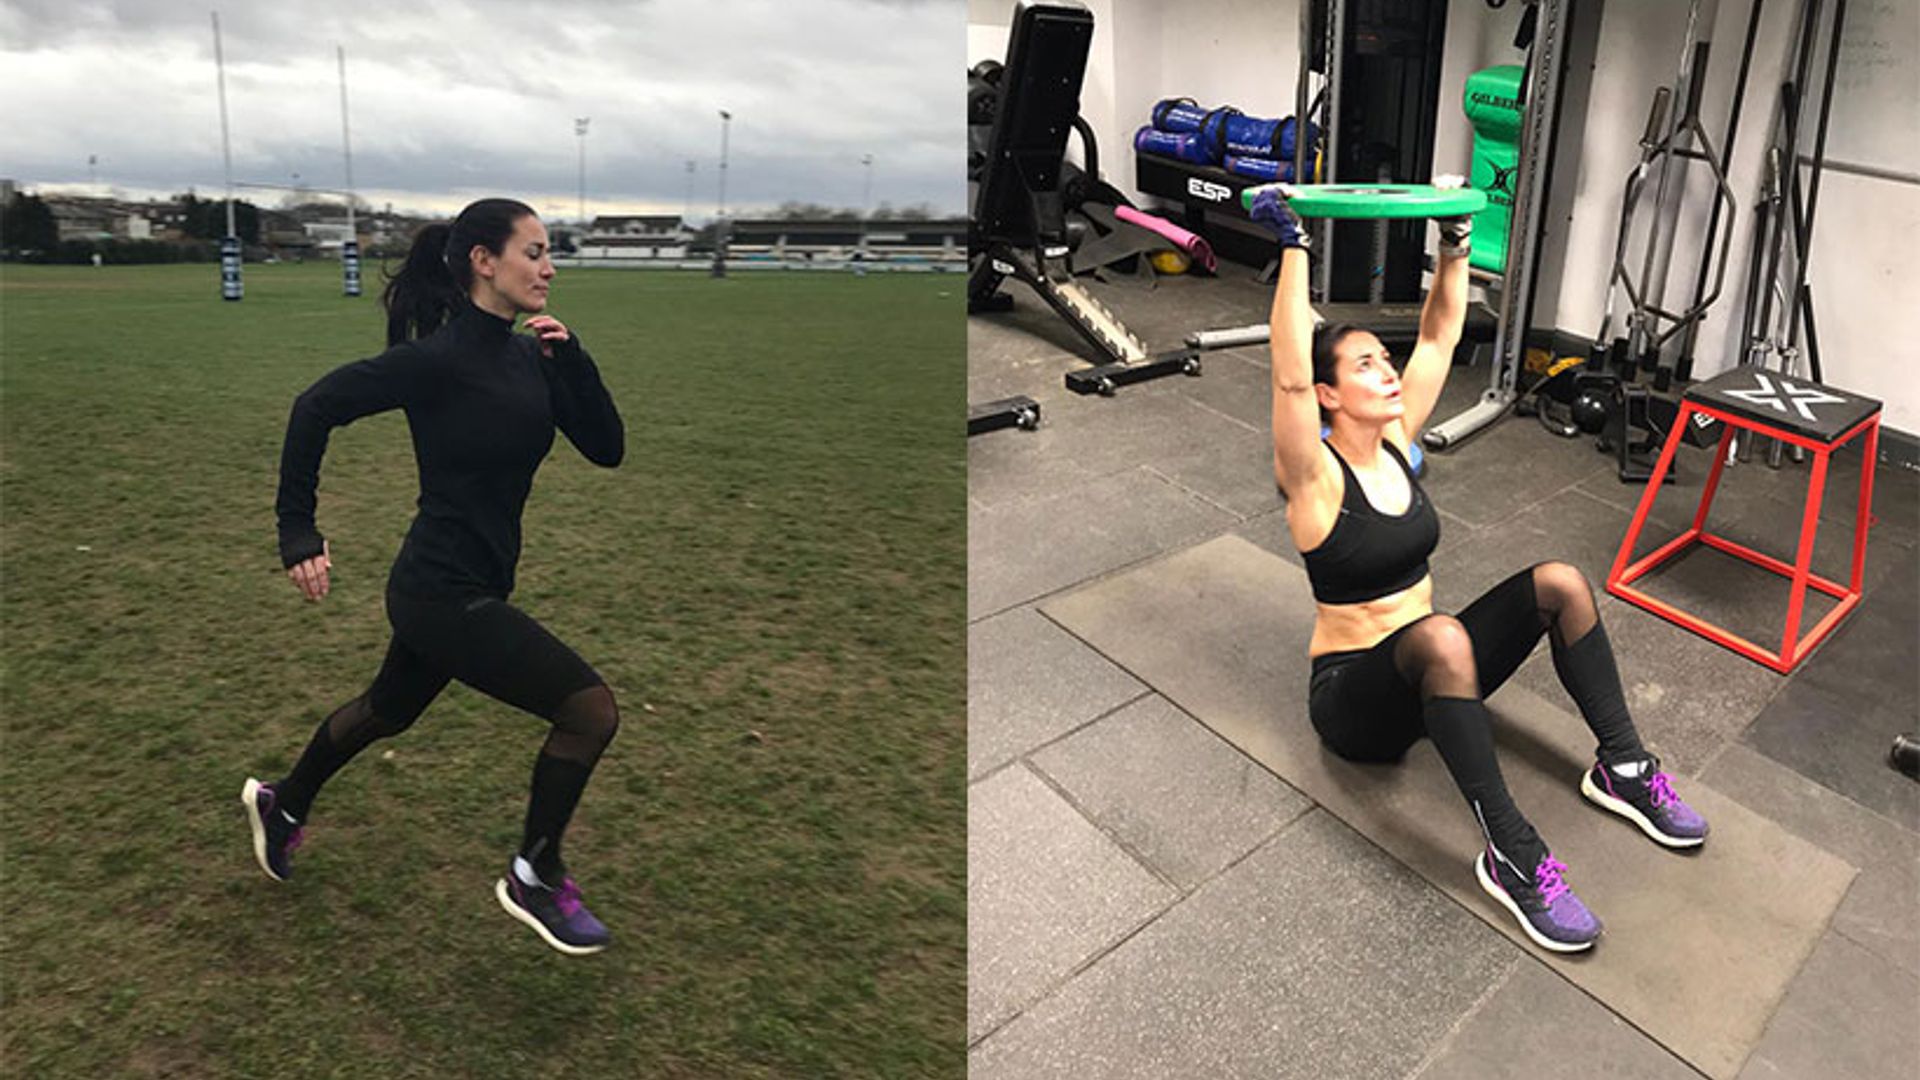 Introducing our new running vlogger! Follow Kirsty Gallacher’s weekly marathon training